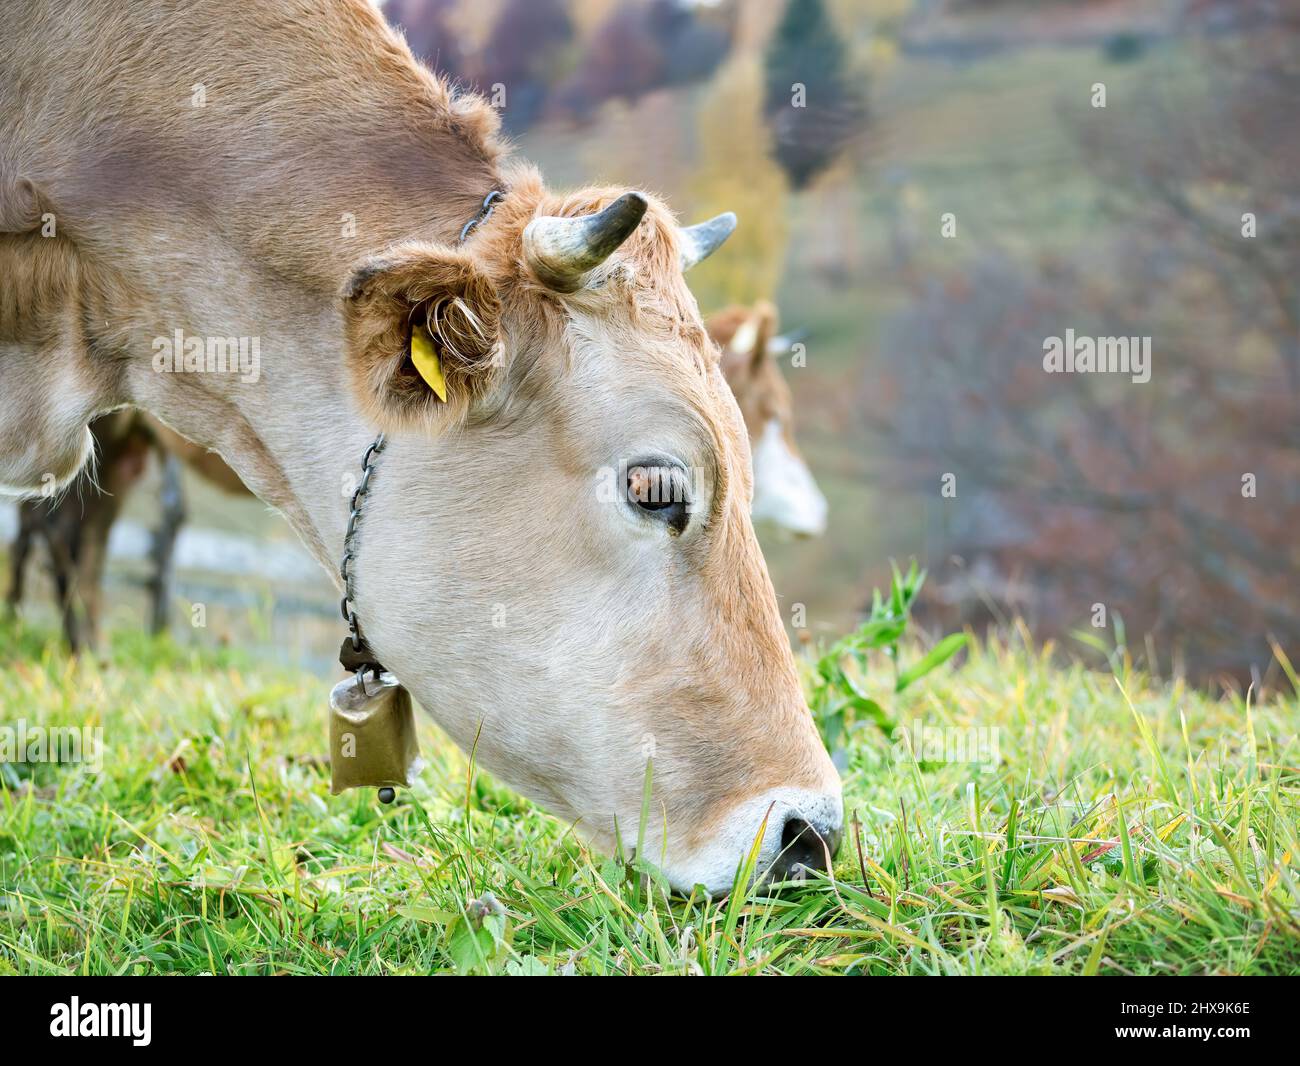 14,627 Cow Bells Royalty-Free Photos and Stock Images